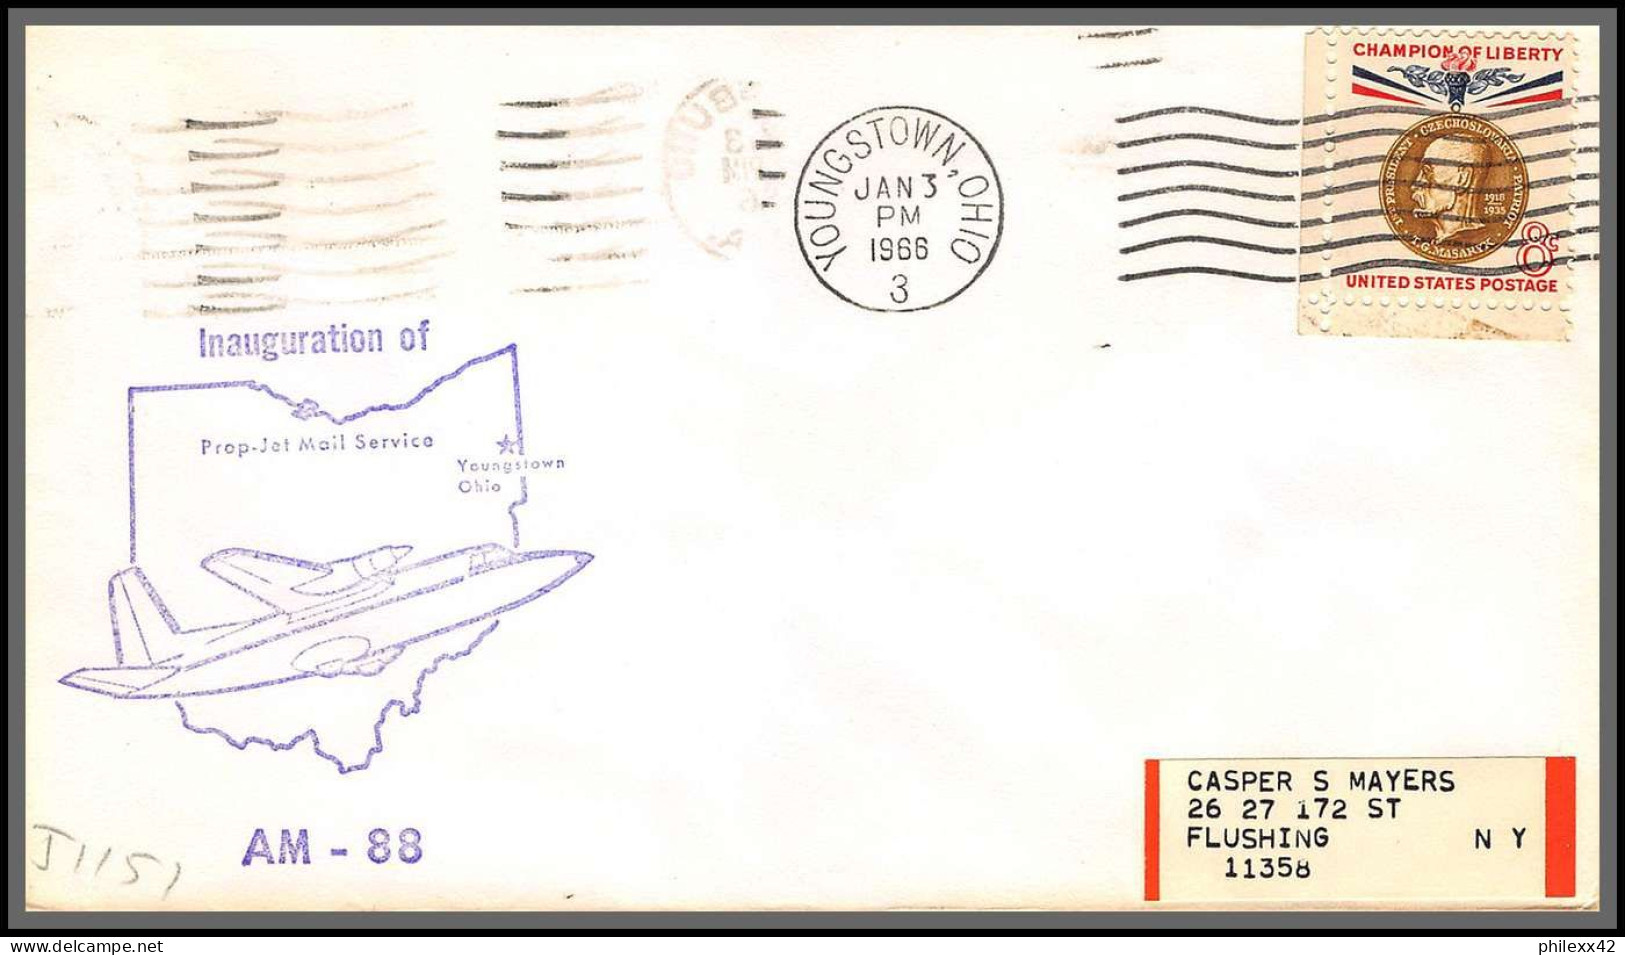 12437 Am 88 Inauguration Prop Jet Mail Service Youngstown 3/1/1966 Premier Vol First Flight Lettre Airmail Cover Usa  - 3c. 1961-... Storia Postale